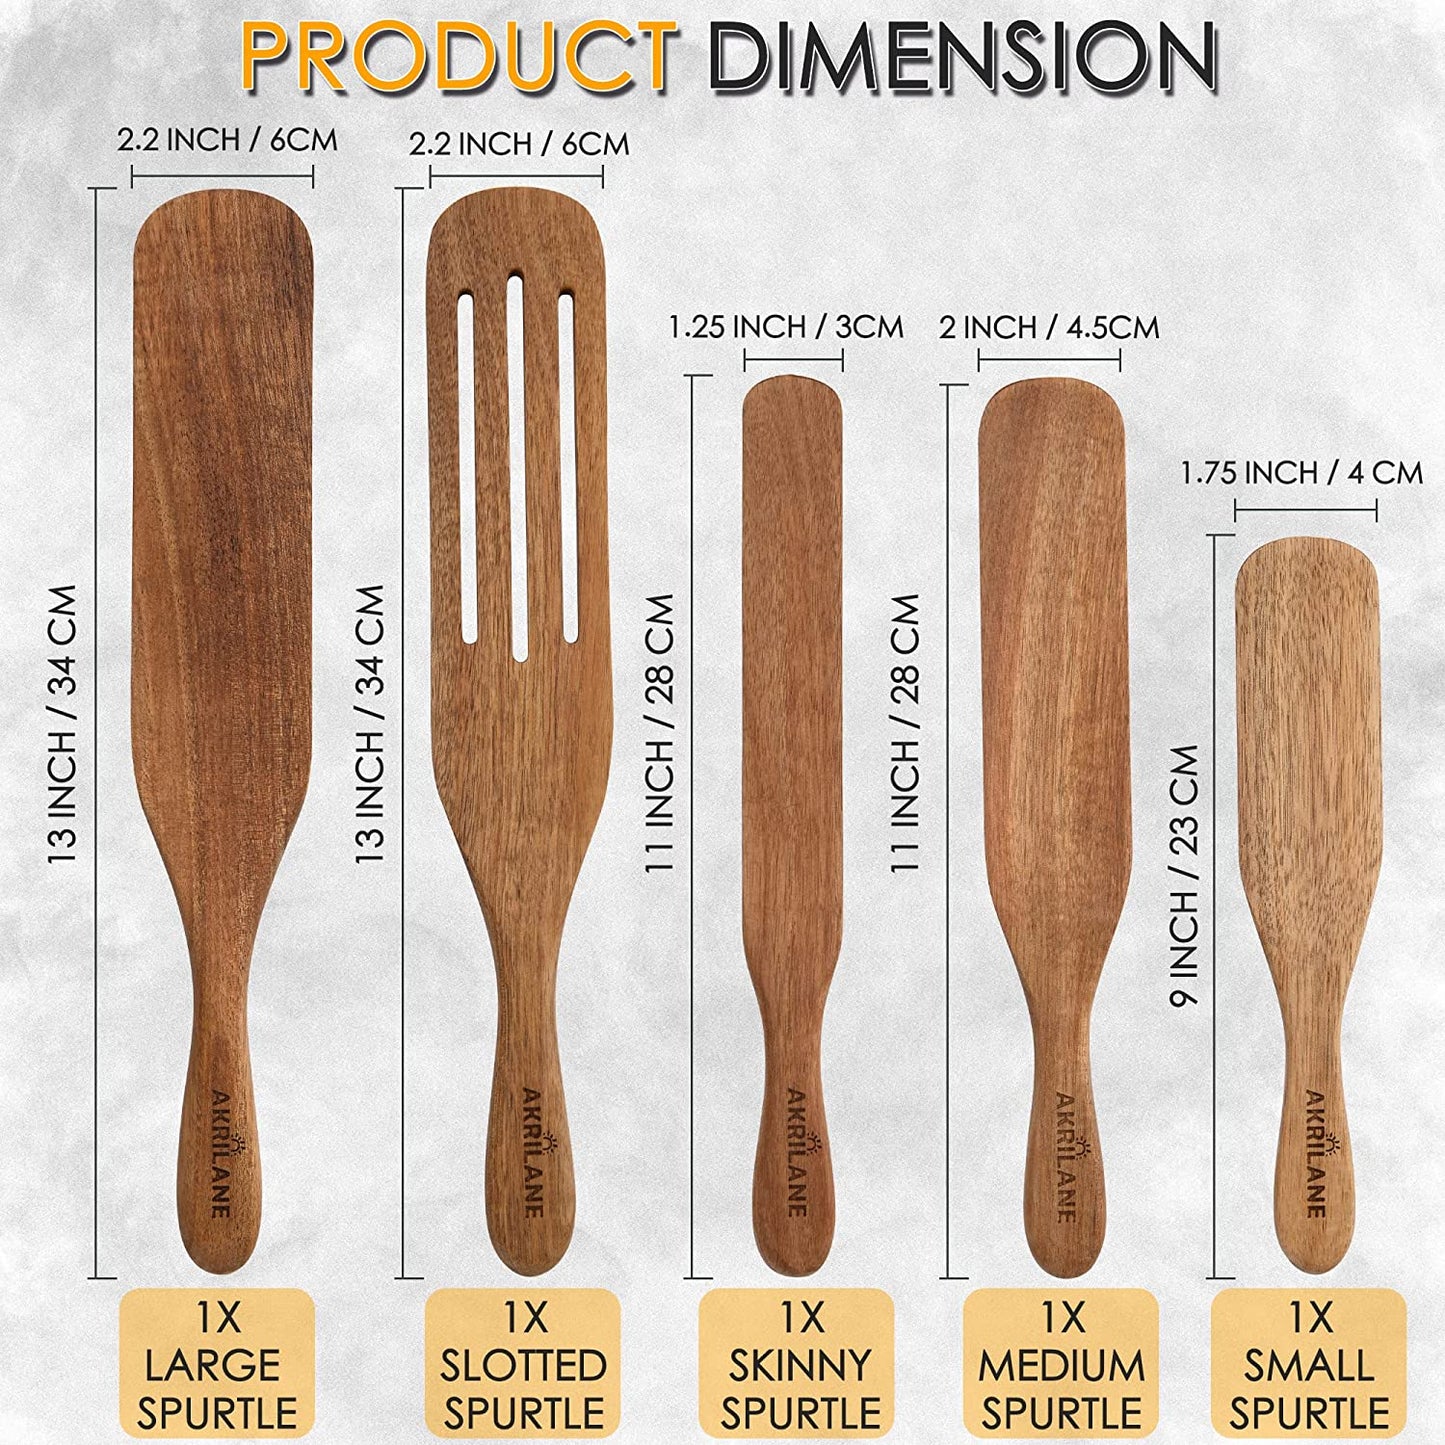 Akrilane - Wooden Spurtle Set | Premium Wooden Serving Utensils | Spurtles Kitchen Tools | Non-Stick Heat Resistant for Wood Cookware for Mixing, Whisking, Stirring, Flipping, Serving | Set of 5 - Akrilane